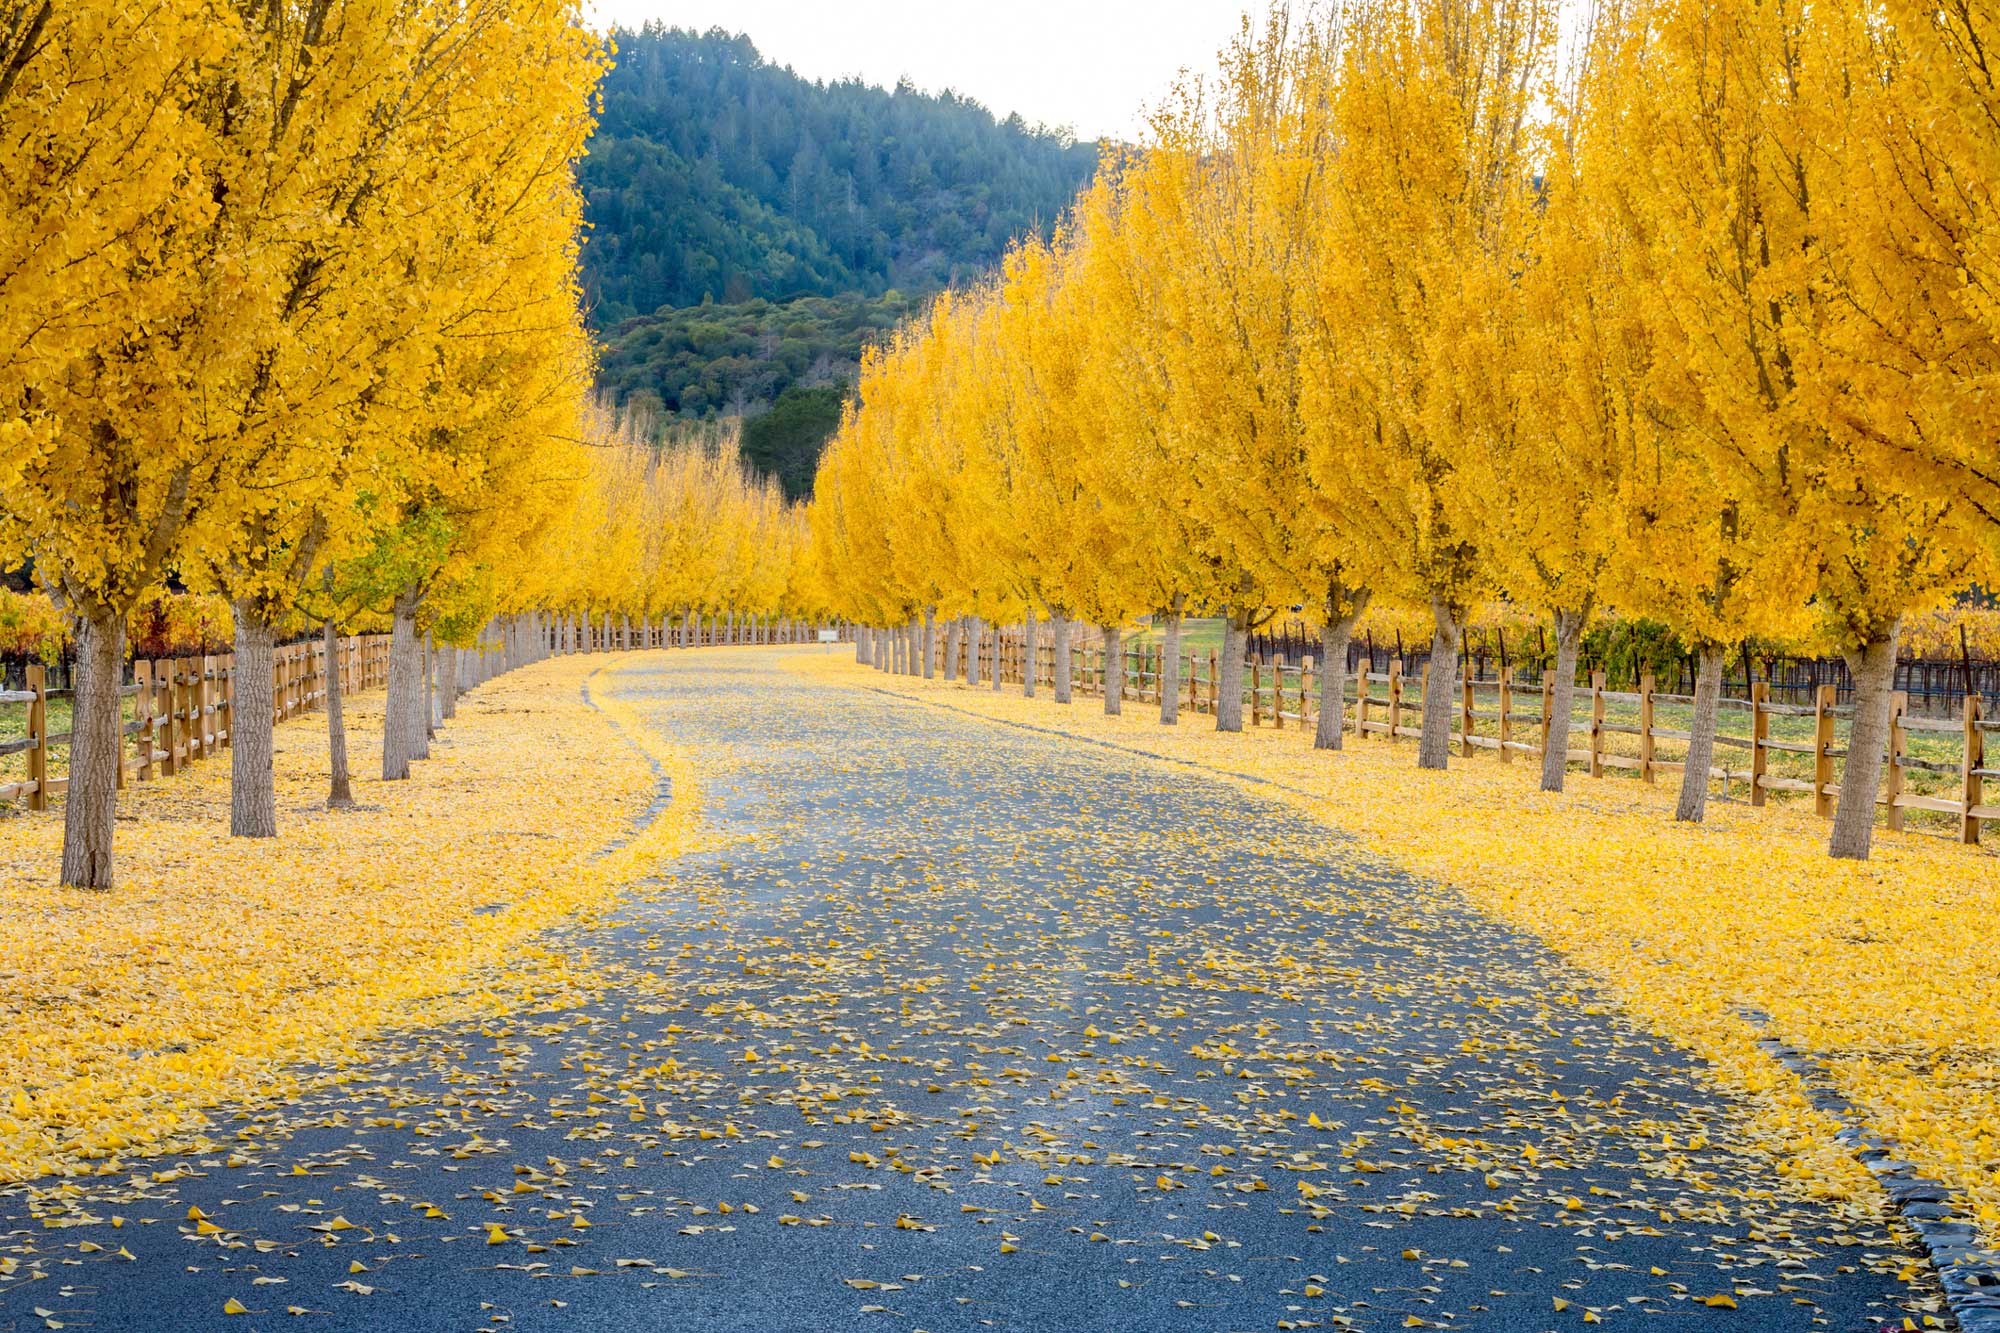 photo - Falling Leaves From Trees on a Road in Napa, California